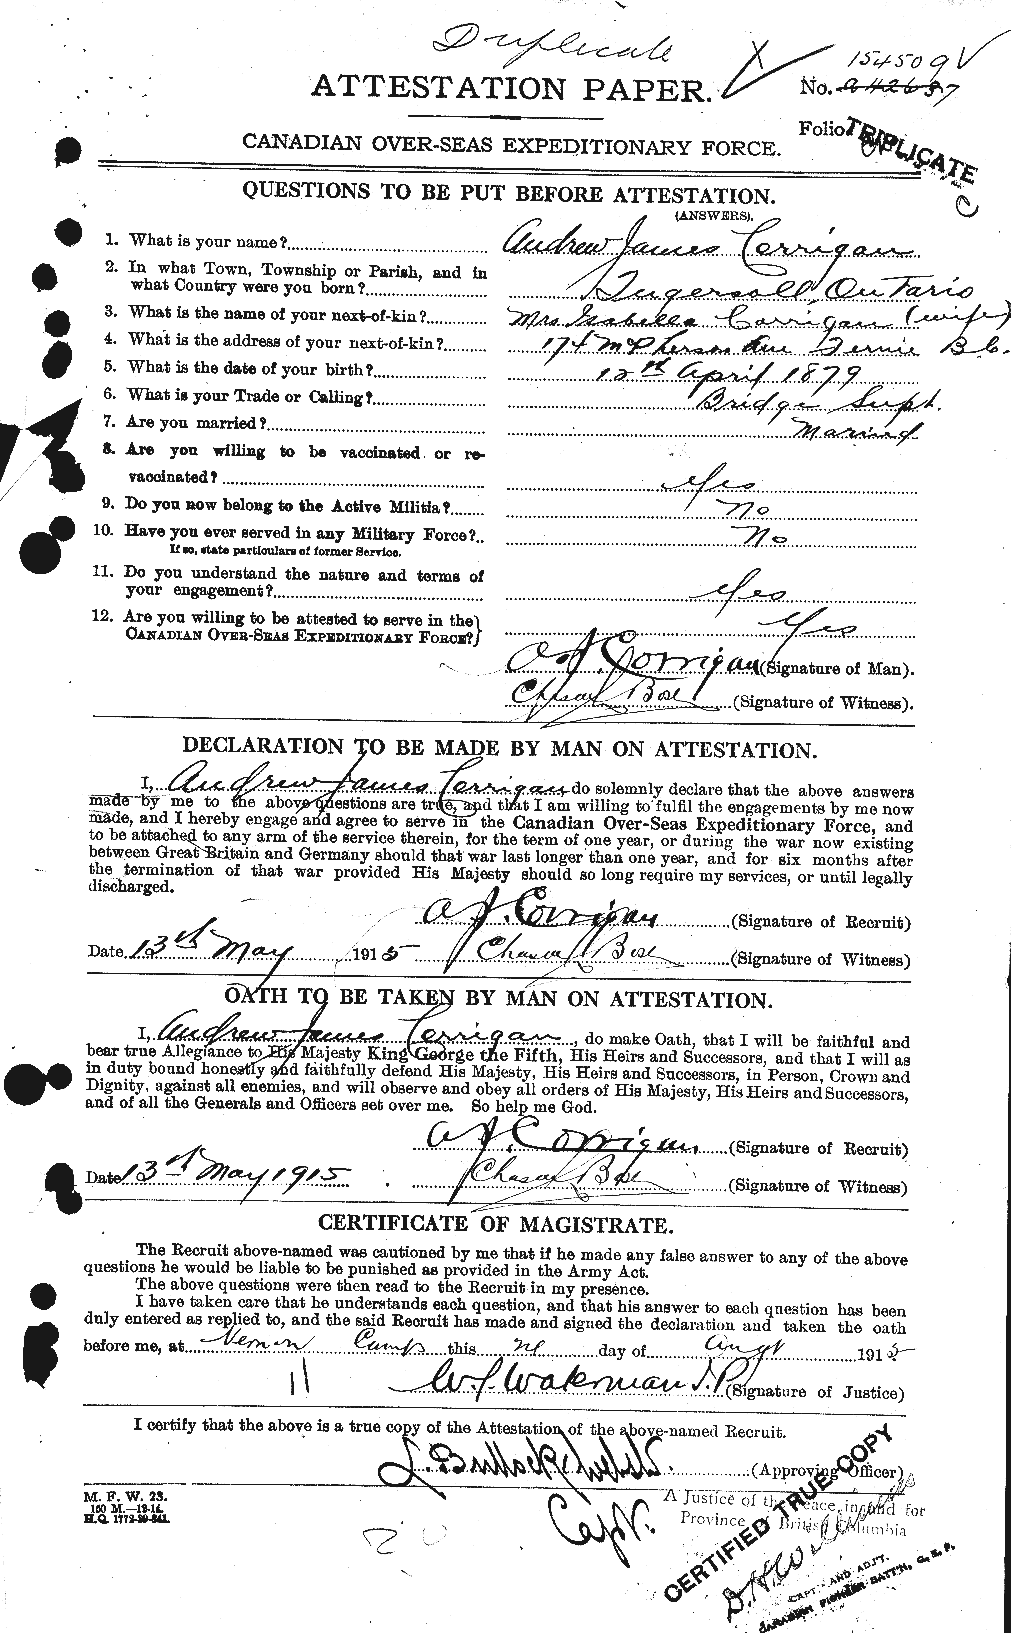 Personnel Records of the First World War - CEF 054843a